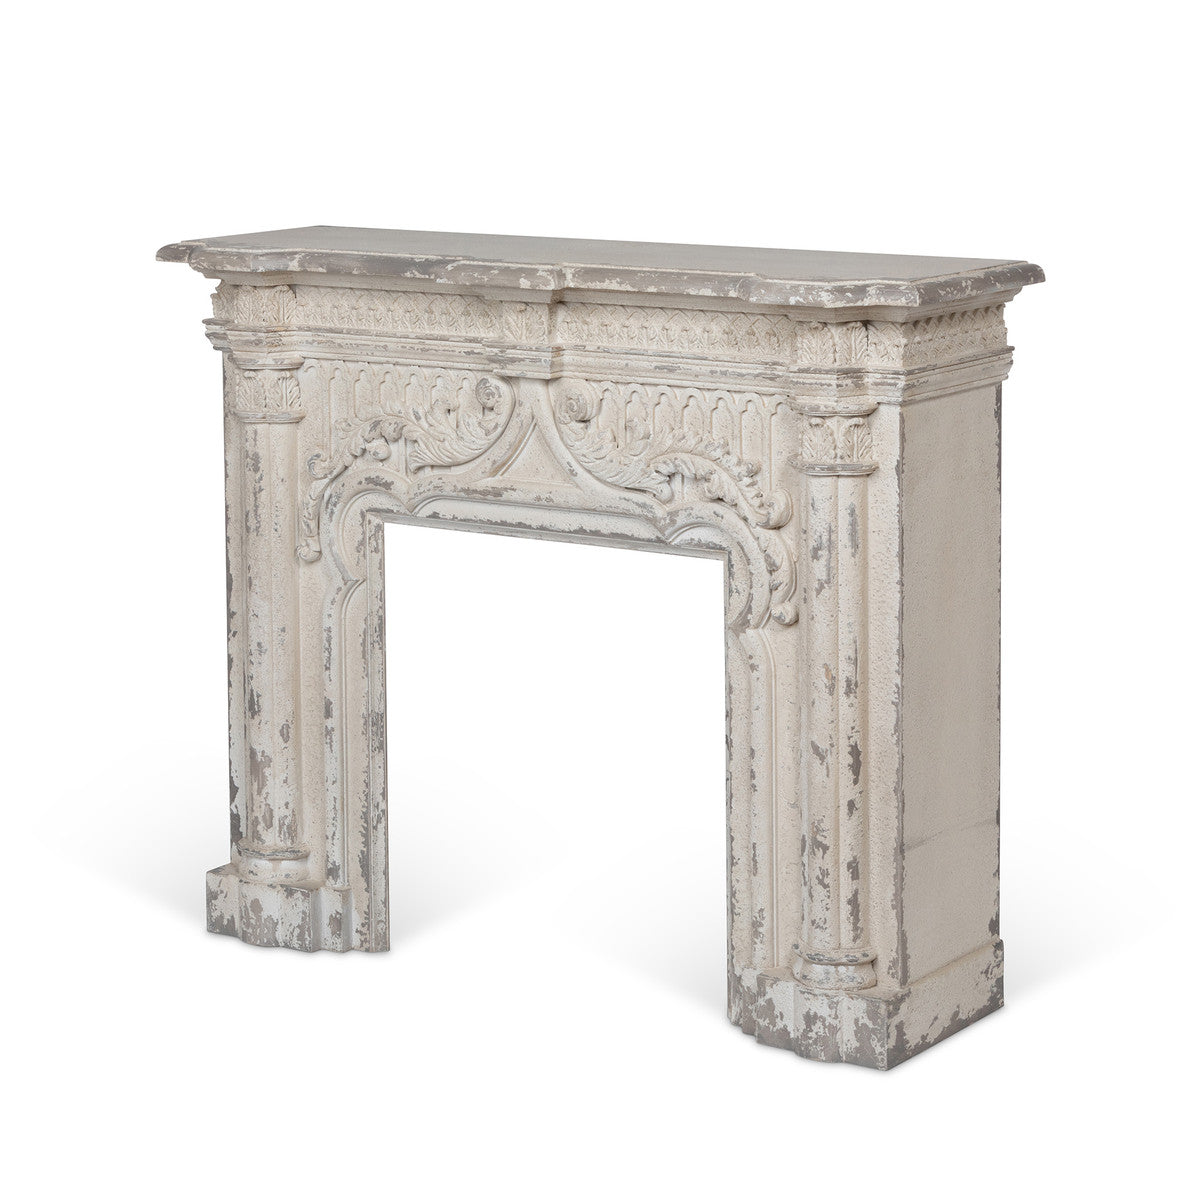 Aged Chateau Fireplace Mantel, Vintage White Stone Fireplace Mantel for sale